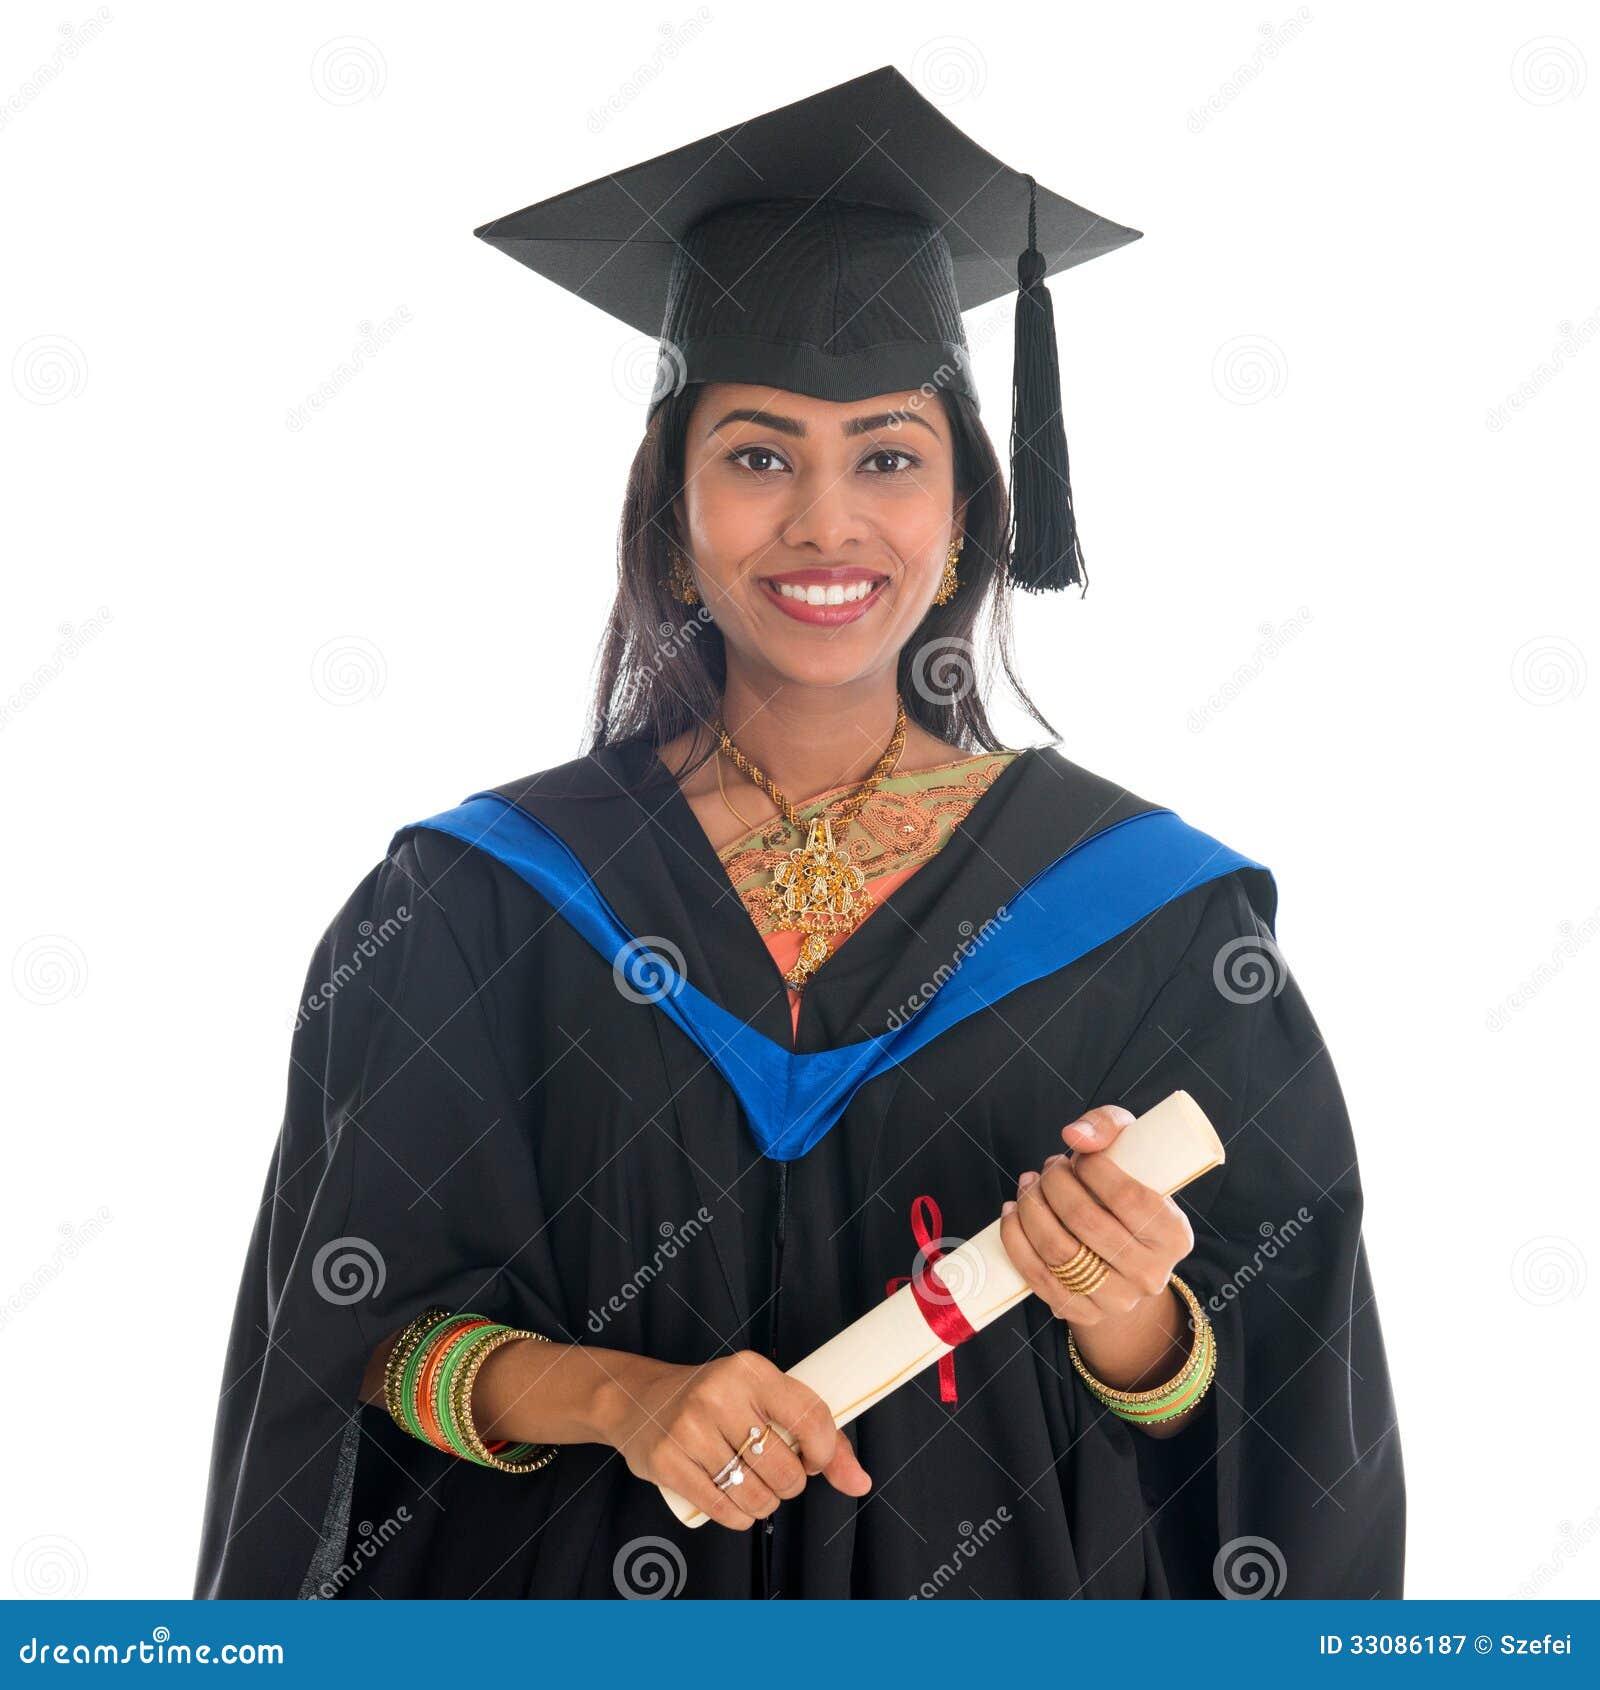 Cap and Gown Senior Pictures - have fun with the traditional